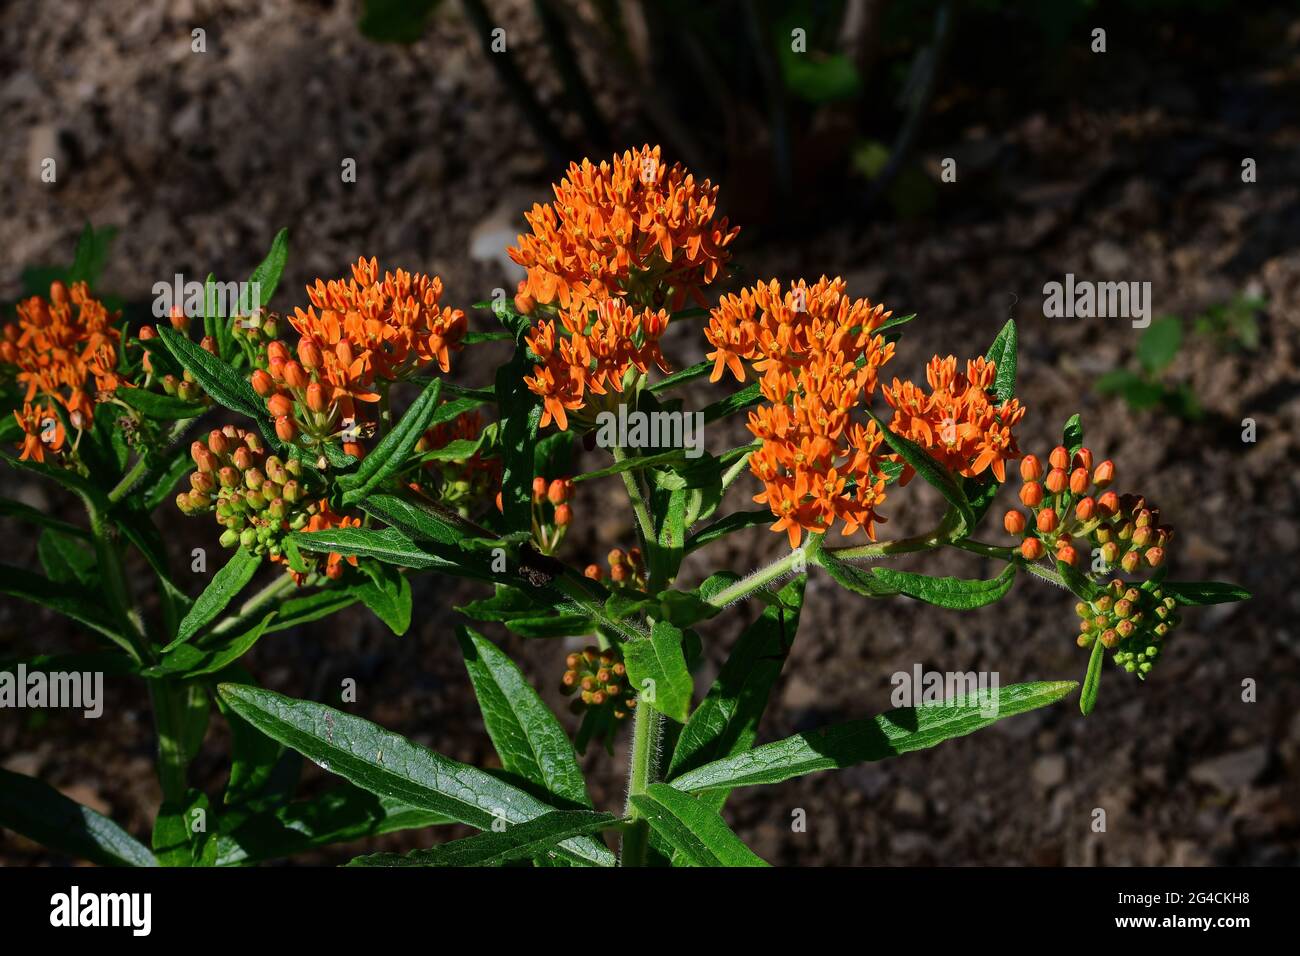 Butterfly weed in morning light. It is a species of milkweed native to eastern North America. It is a perennial plant with clustered orange or yellow Stock Photo